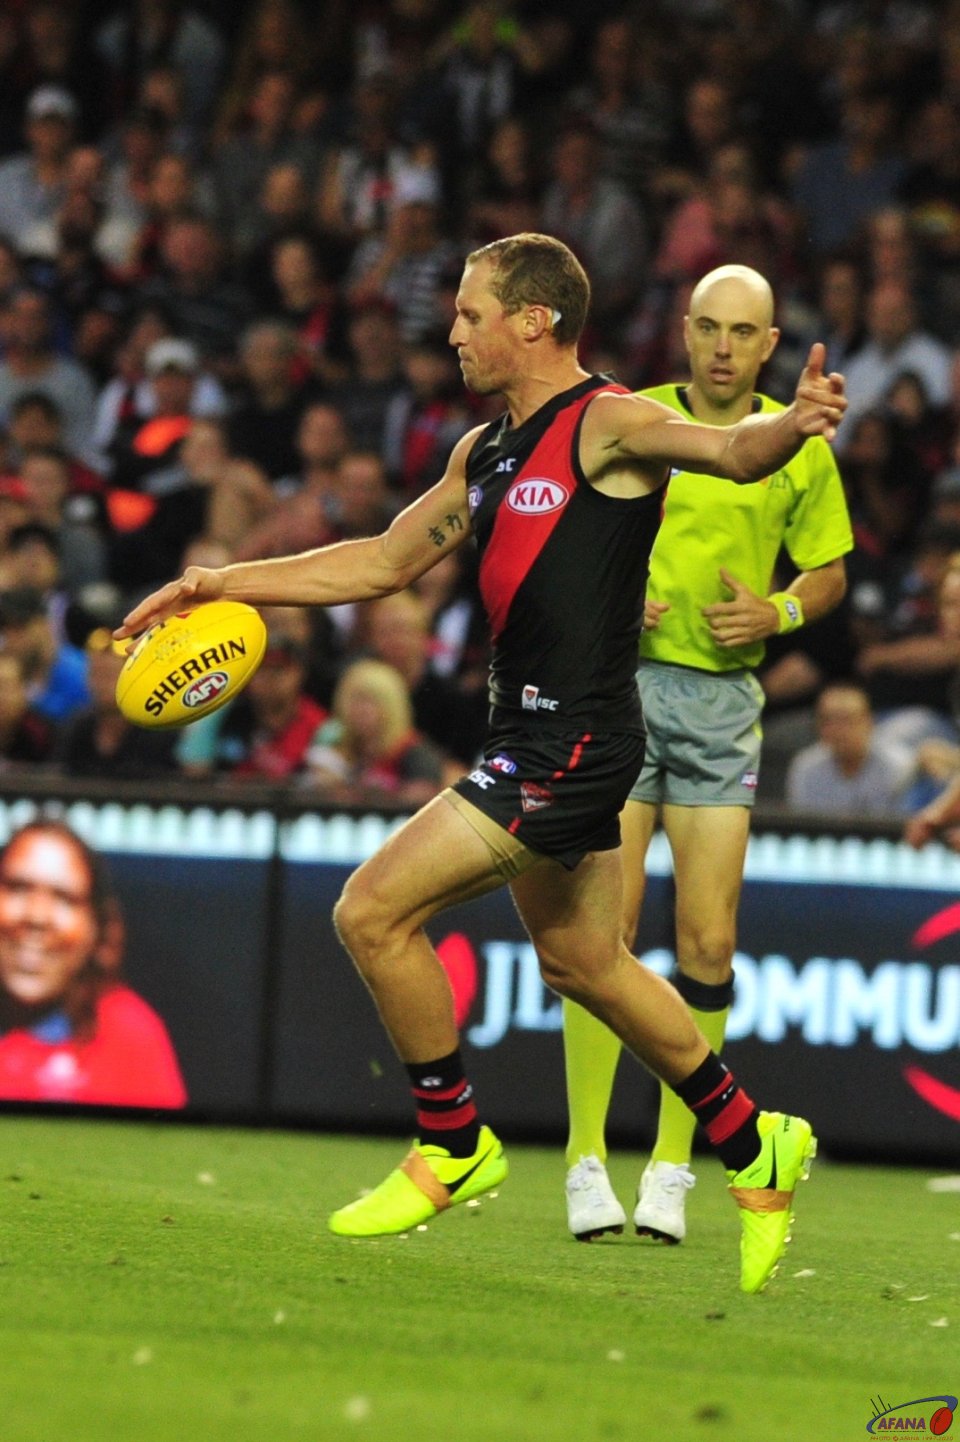 Top up player James Kelly shows the form that got him a contract extension with the Bombers